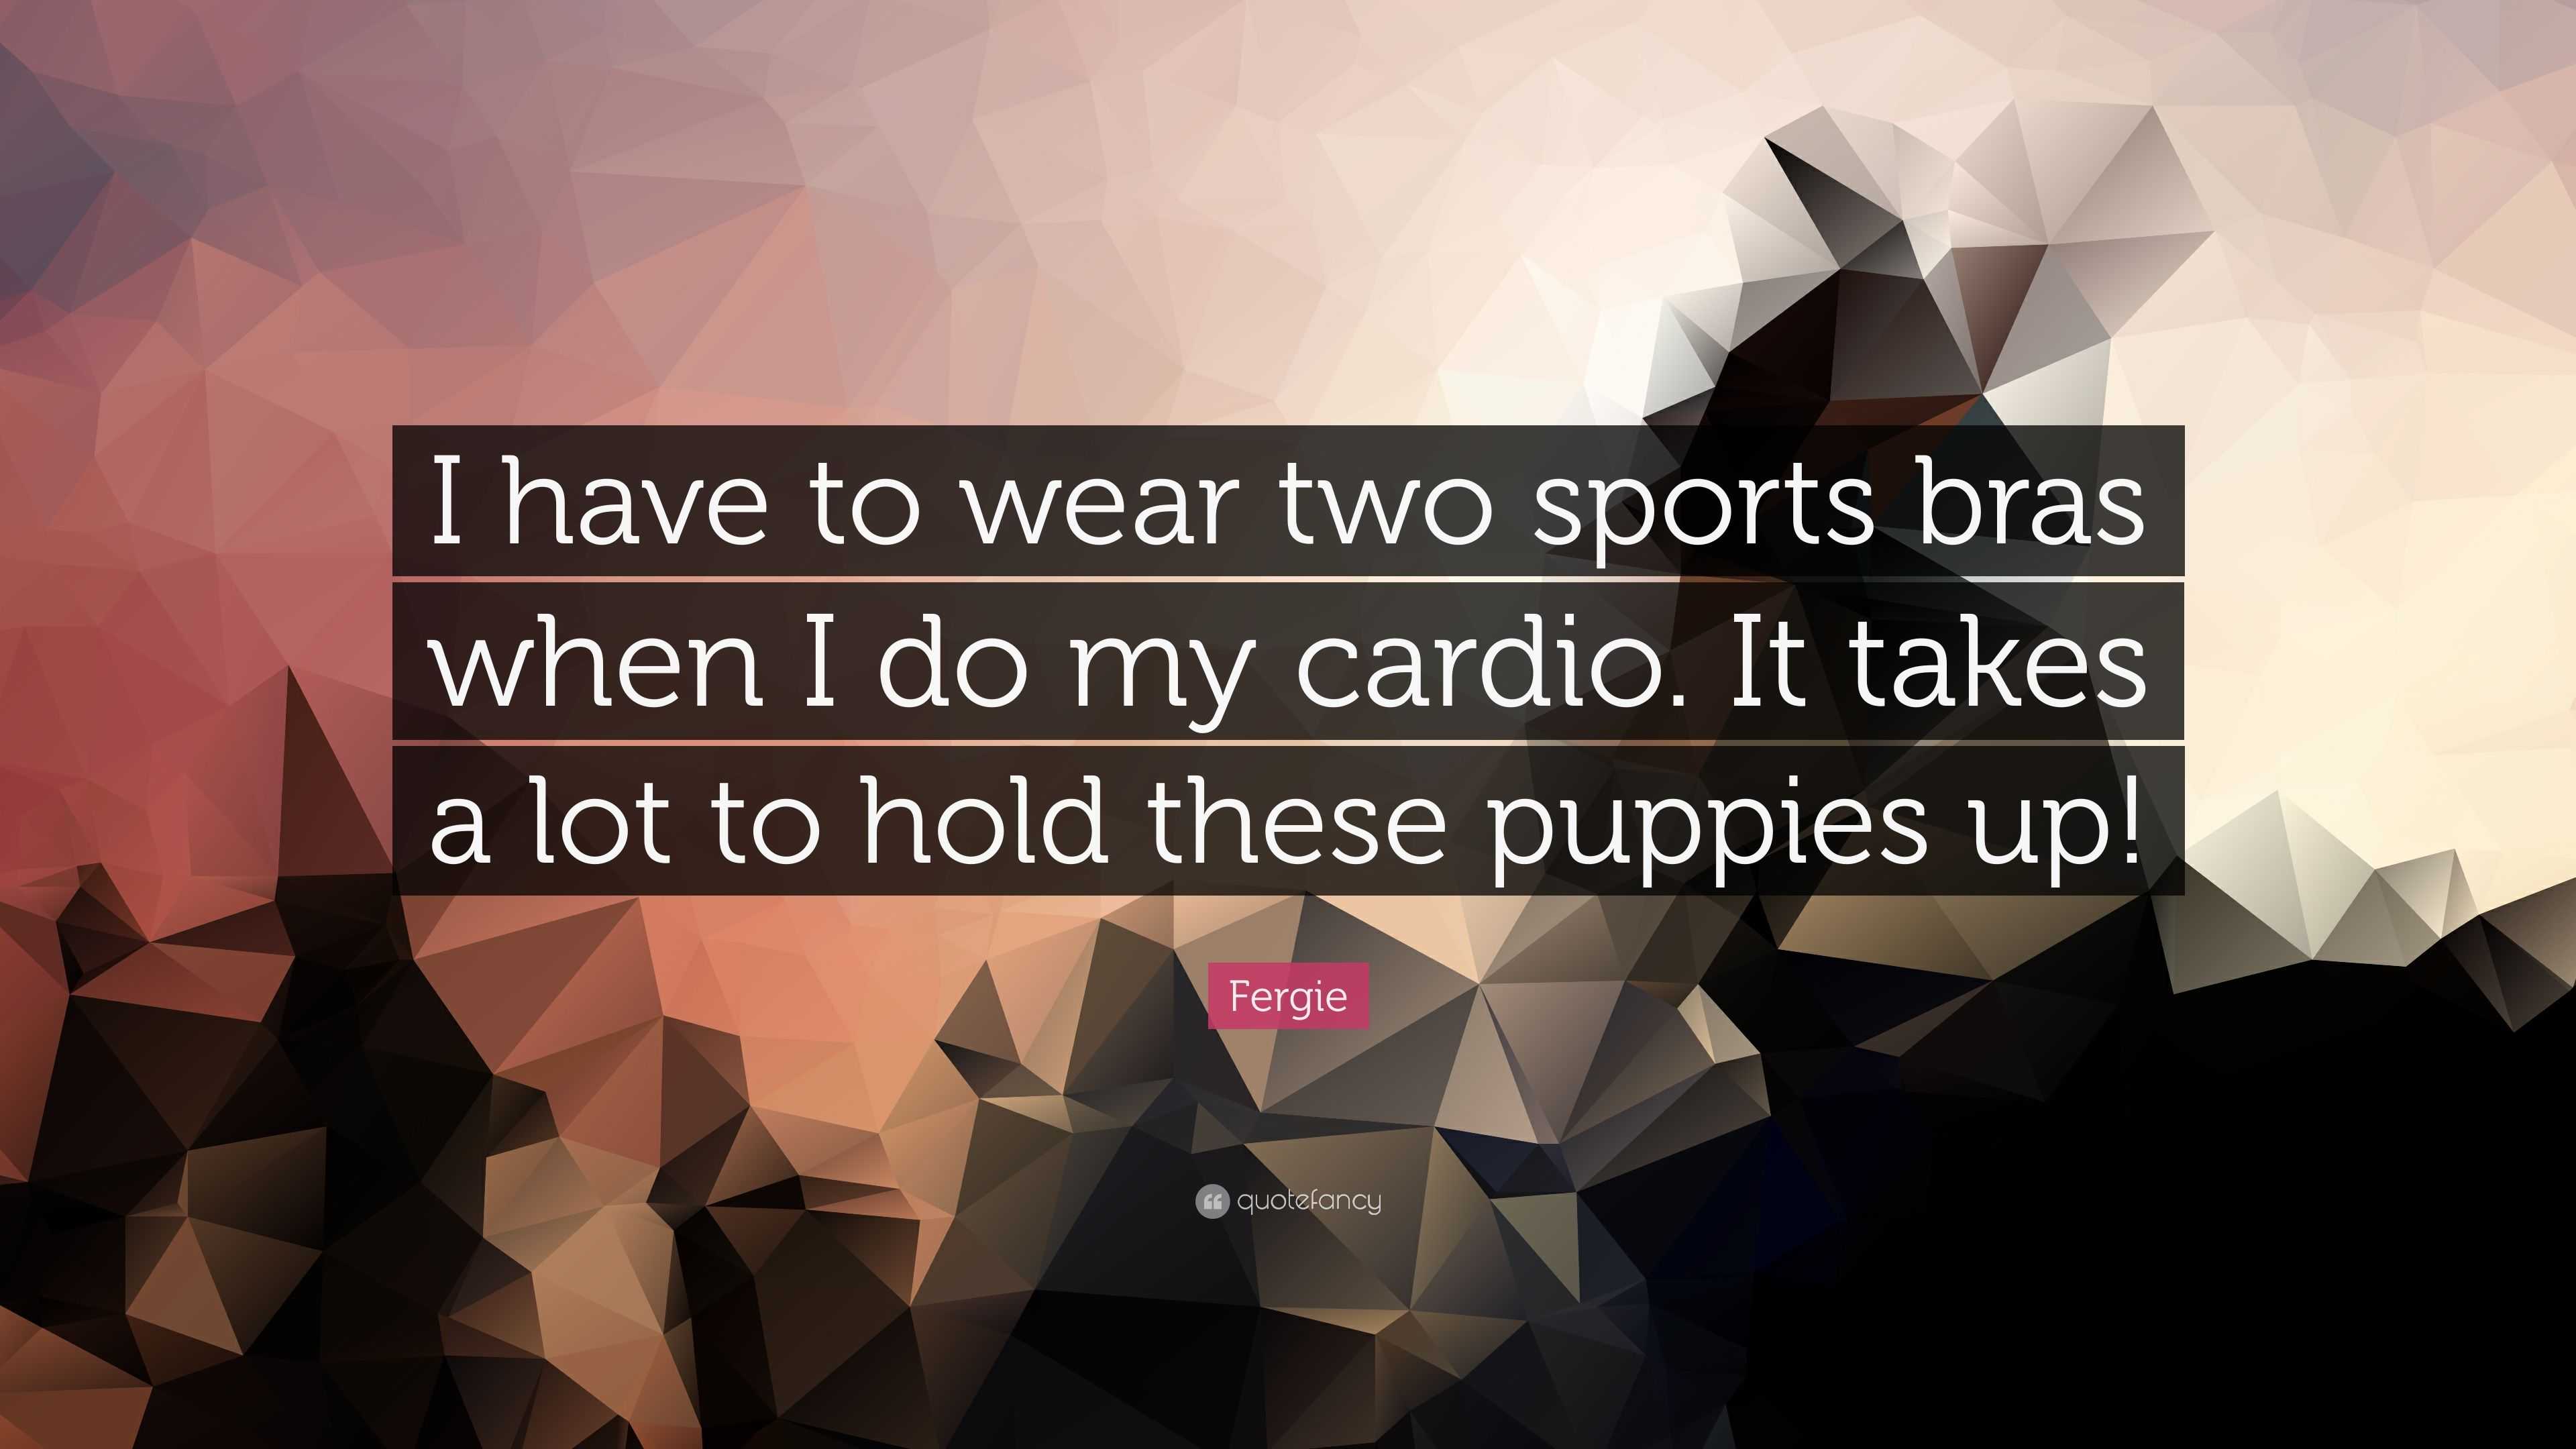 Fergie Quote: “I have to wear two sports bras when I do my cardio. It takes